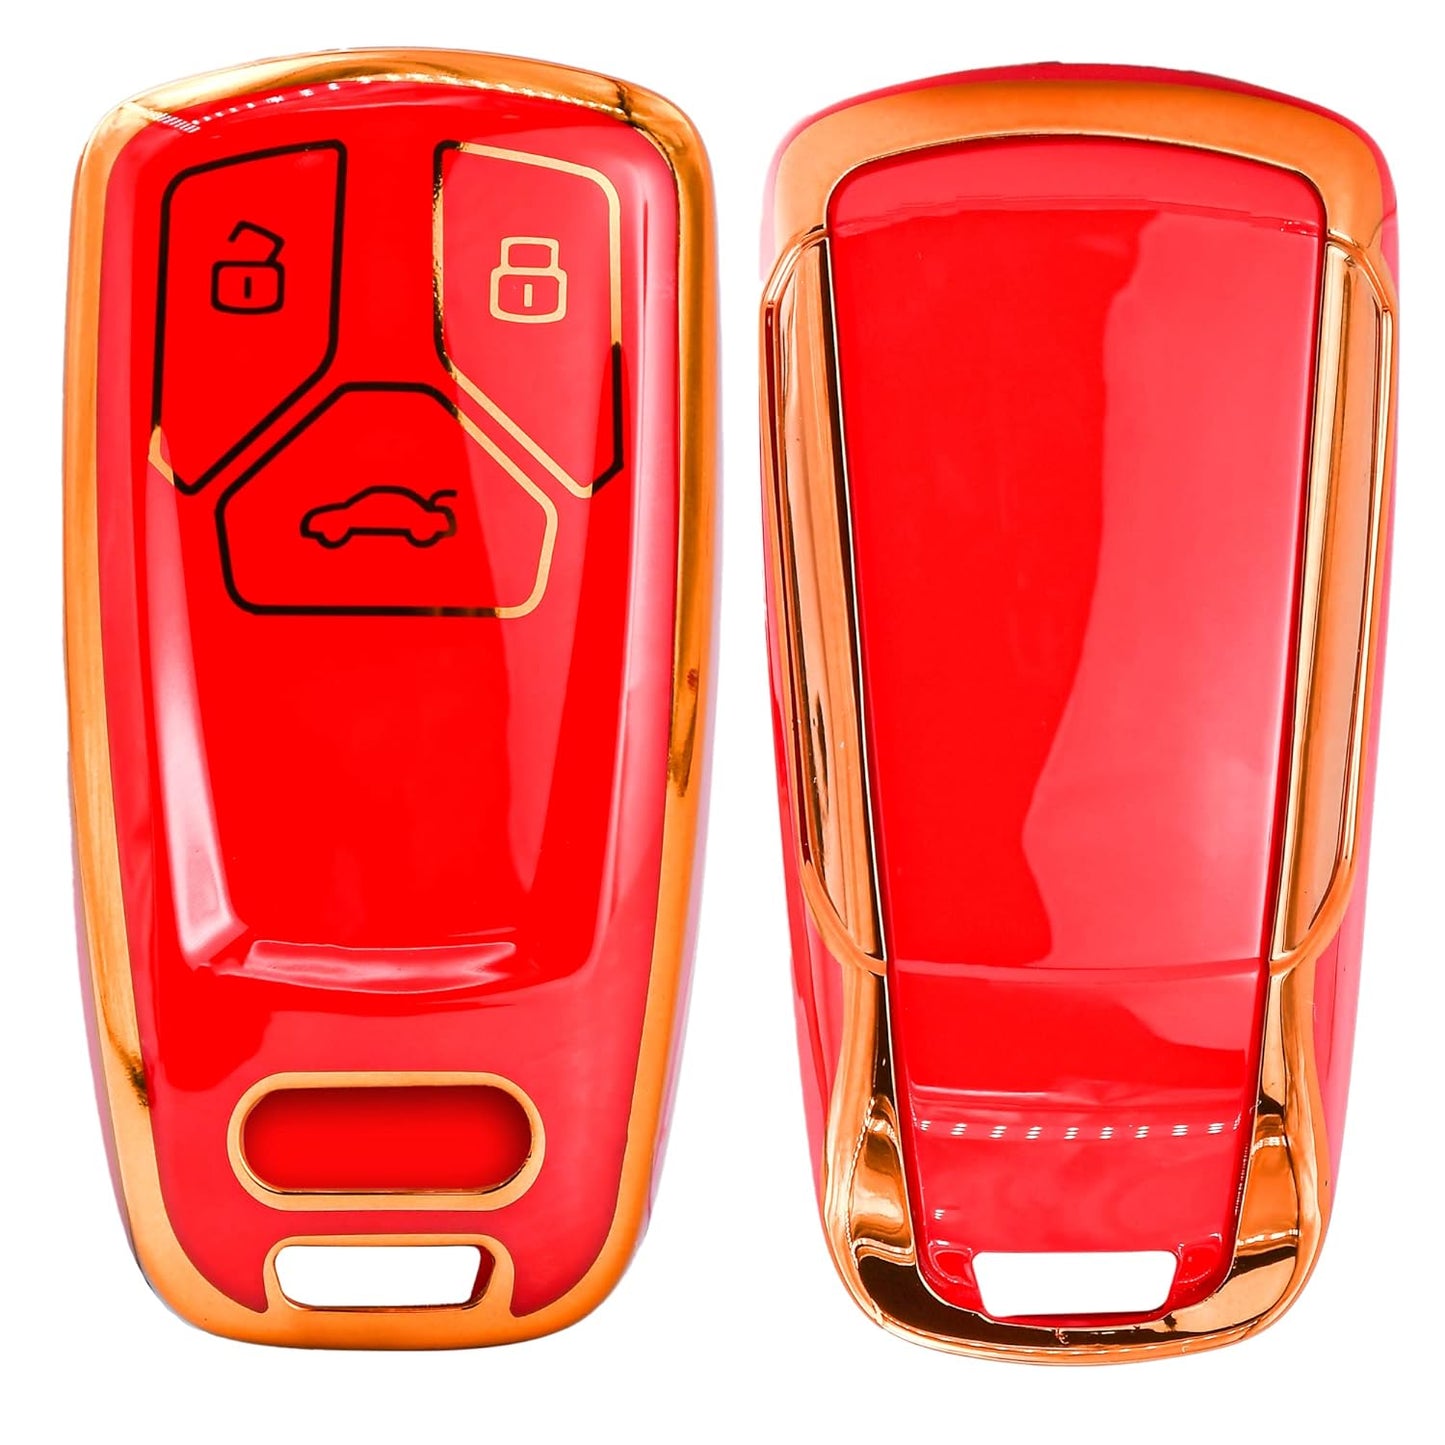 
                  
                    KMH TPU Gold Car Key Cover Compatible with Audi A4 TT TTS Q7 2016 2017 Key Cover (Pack of 2, White-Red)-TPU GOLD KEY COVER-KMH-CARPLUS
                  
                